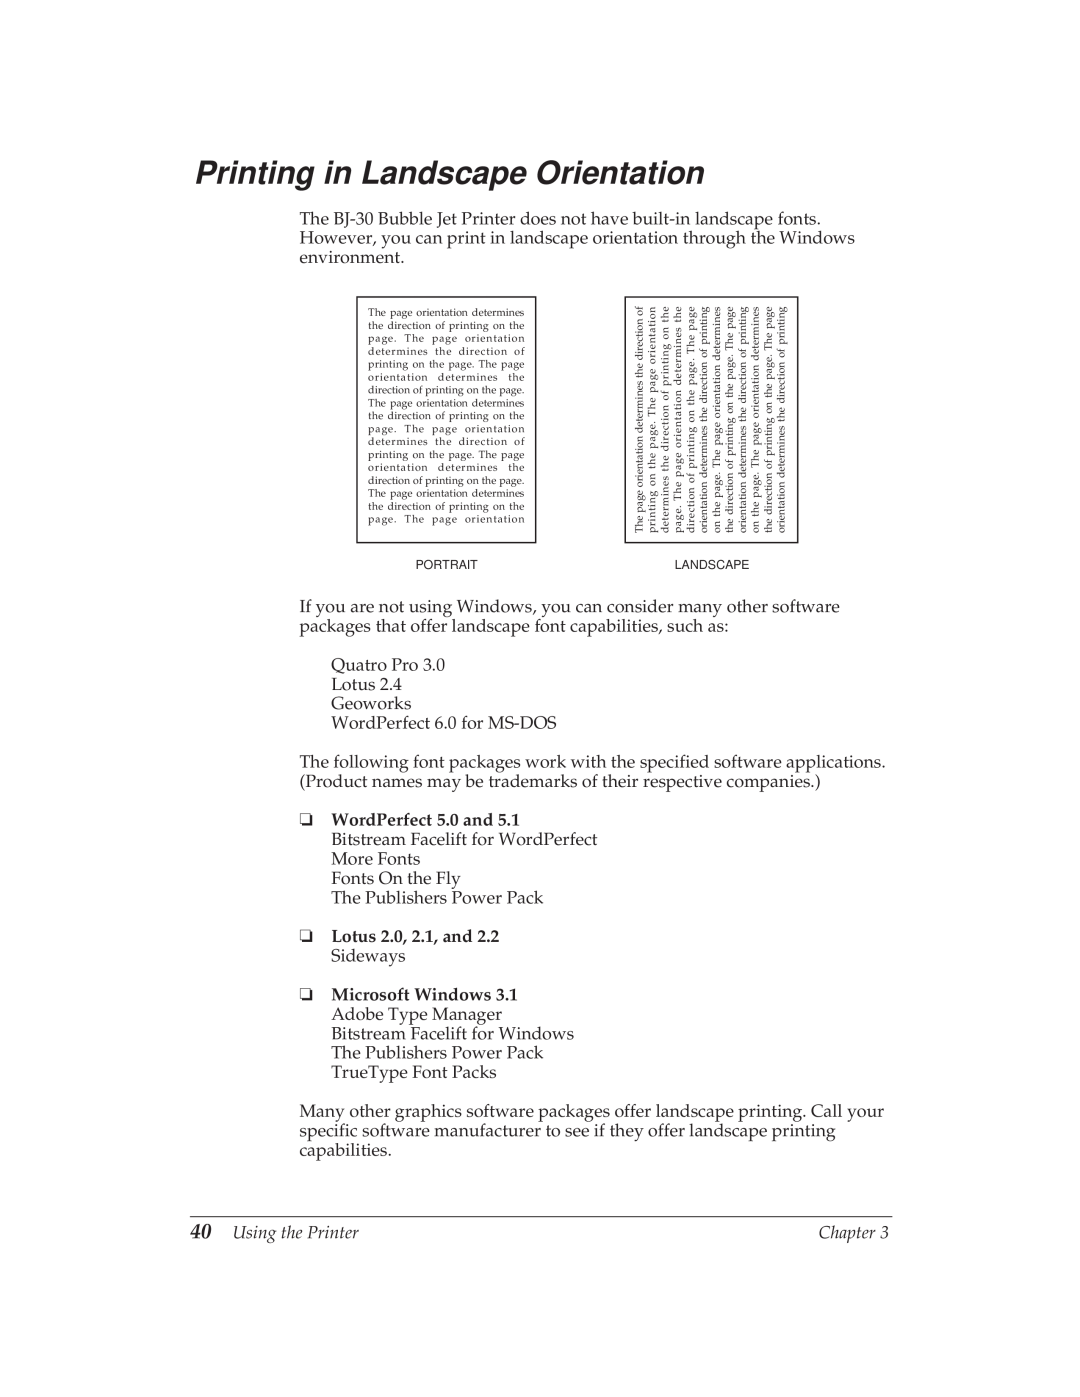 Canon BJ-30 manual Printing in Landscape Orientation, WordPerfect 5.0 and 5.1 Bitstream Facelift for WordPerfect More Fonts 